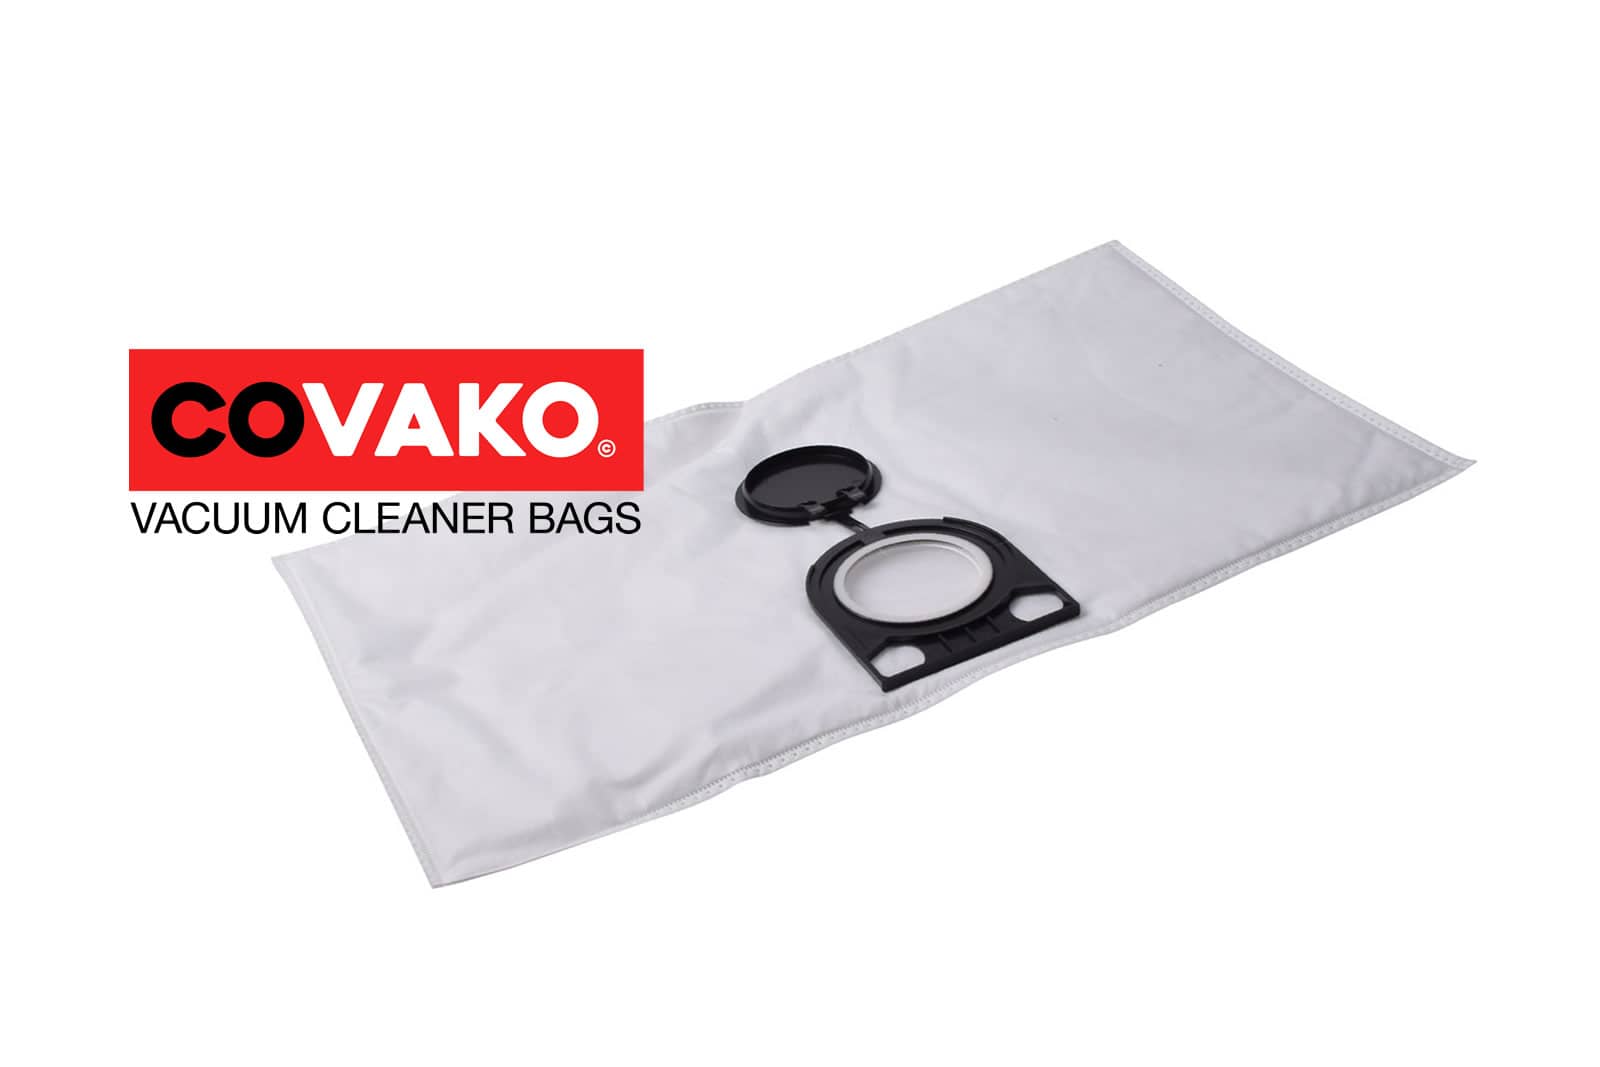 Electrostar FB 22 / Synthesis - Electrostar vacuum cleaner bags